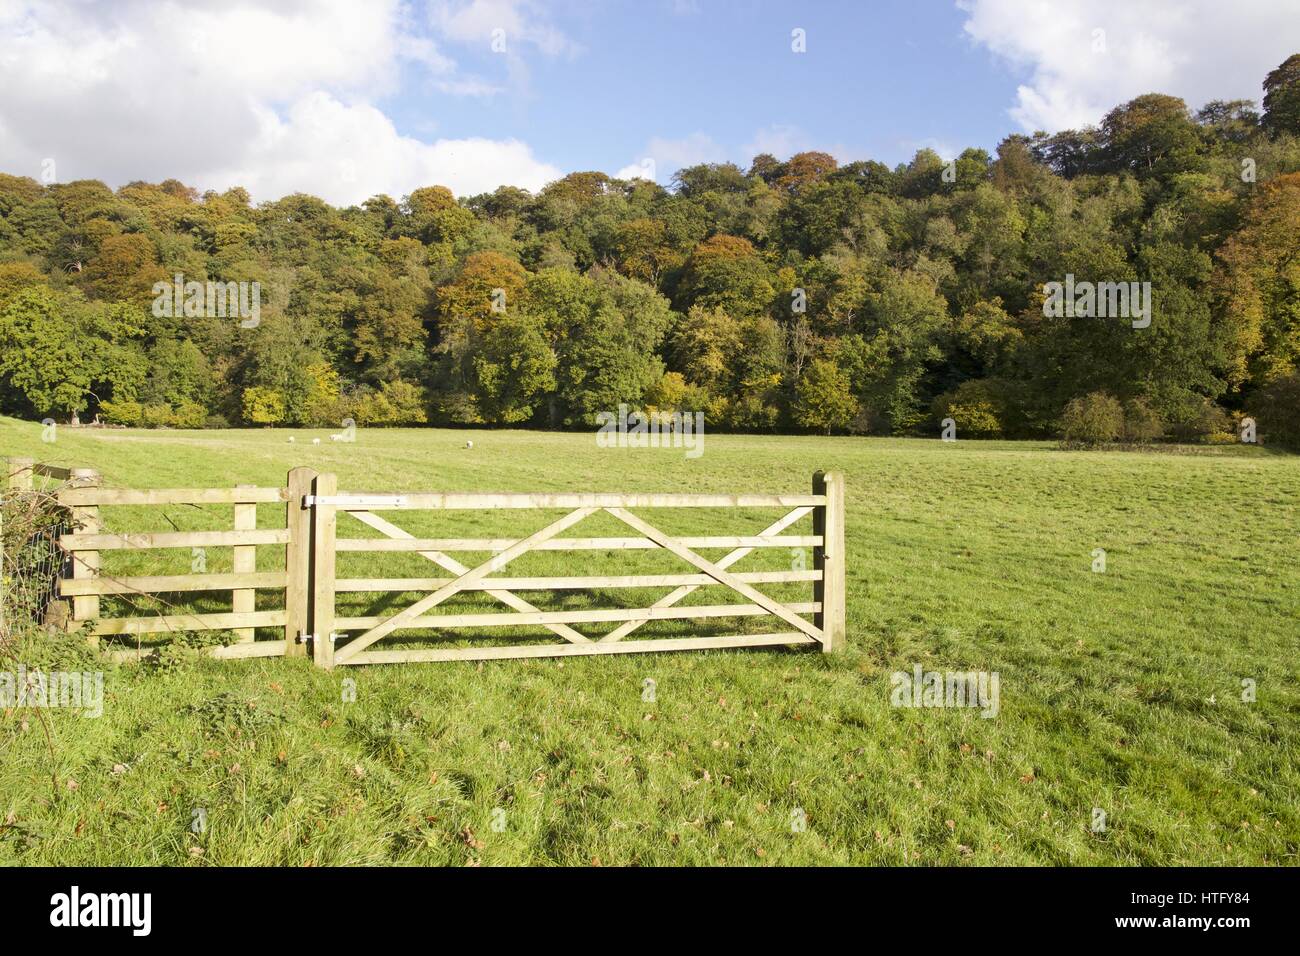 Someones taken offence! A gate in a grass field with woodland behind, but with no fence next to the gate. Stock Photo